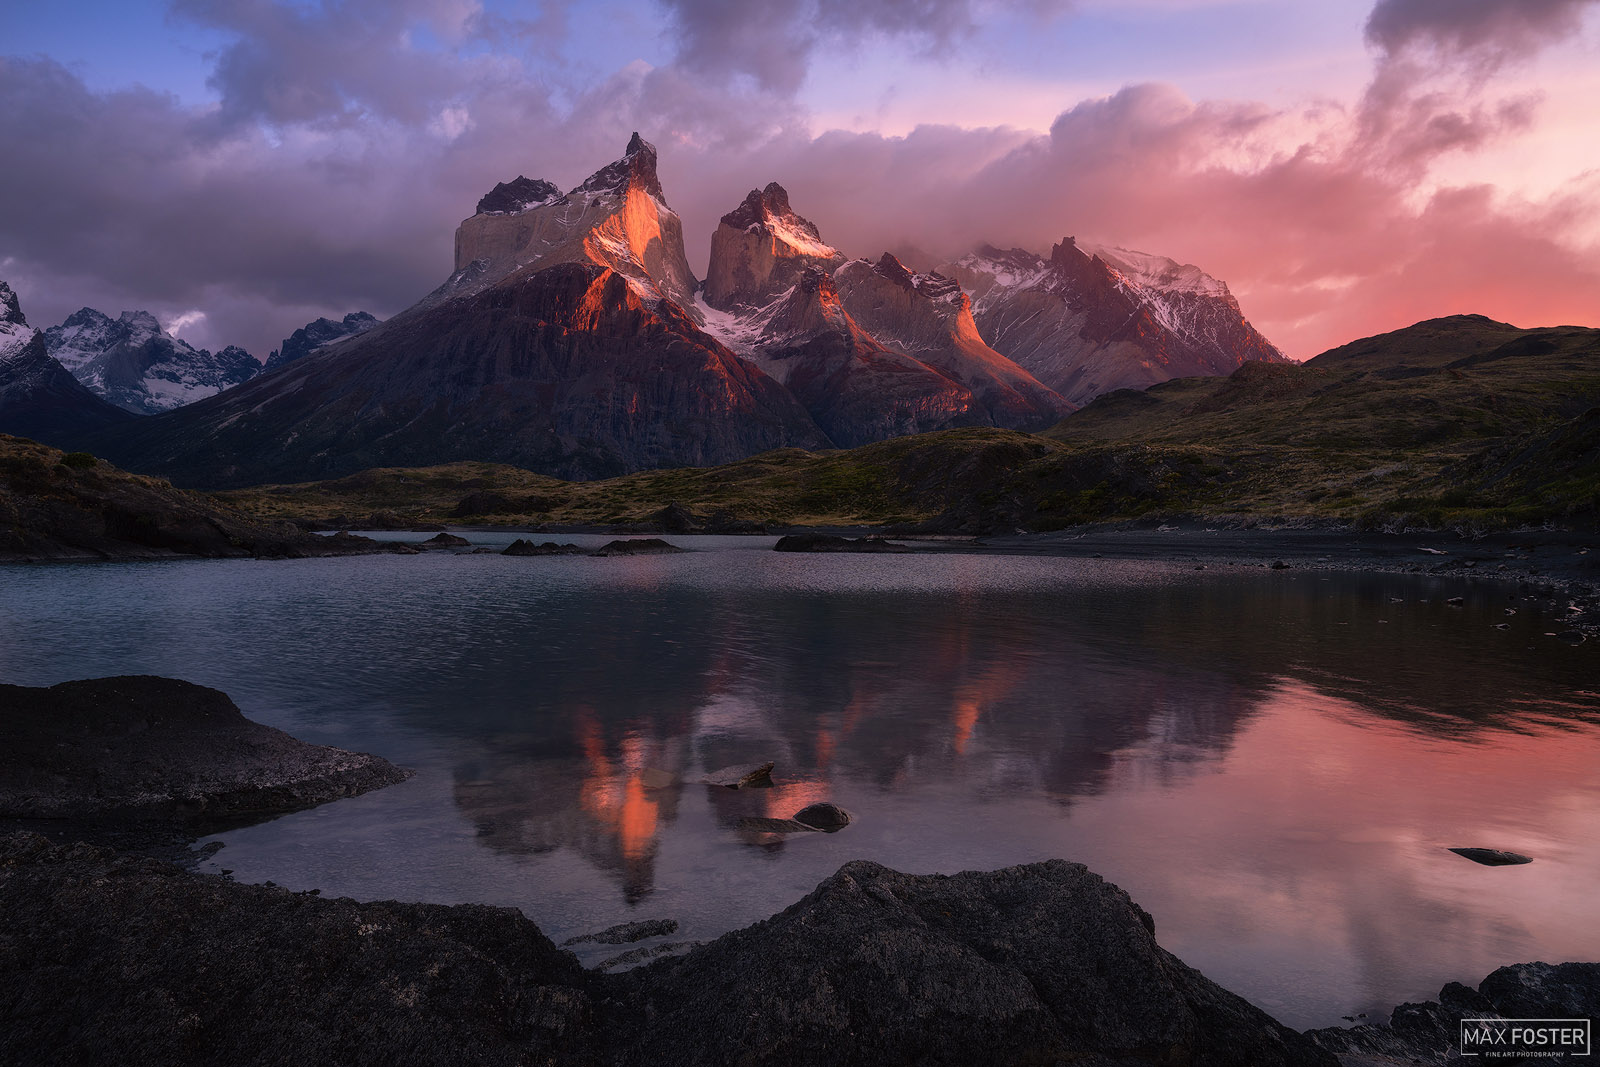 Elevate your walls with Reflective Presence, Max Foster's limited edition photographic print of Los Cuernos (The Horns) Torres...